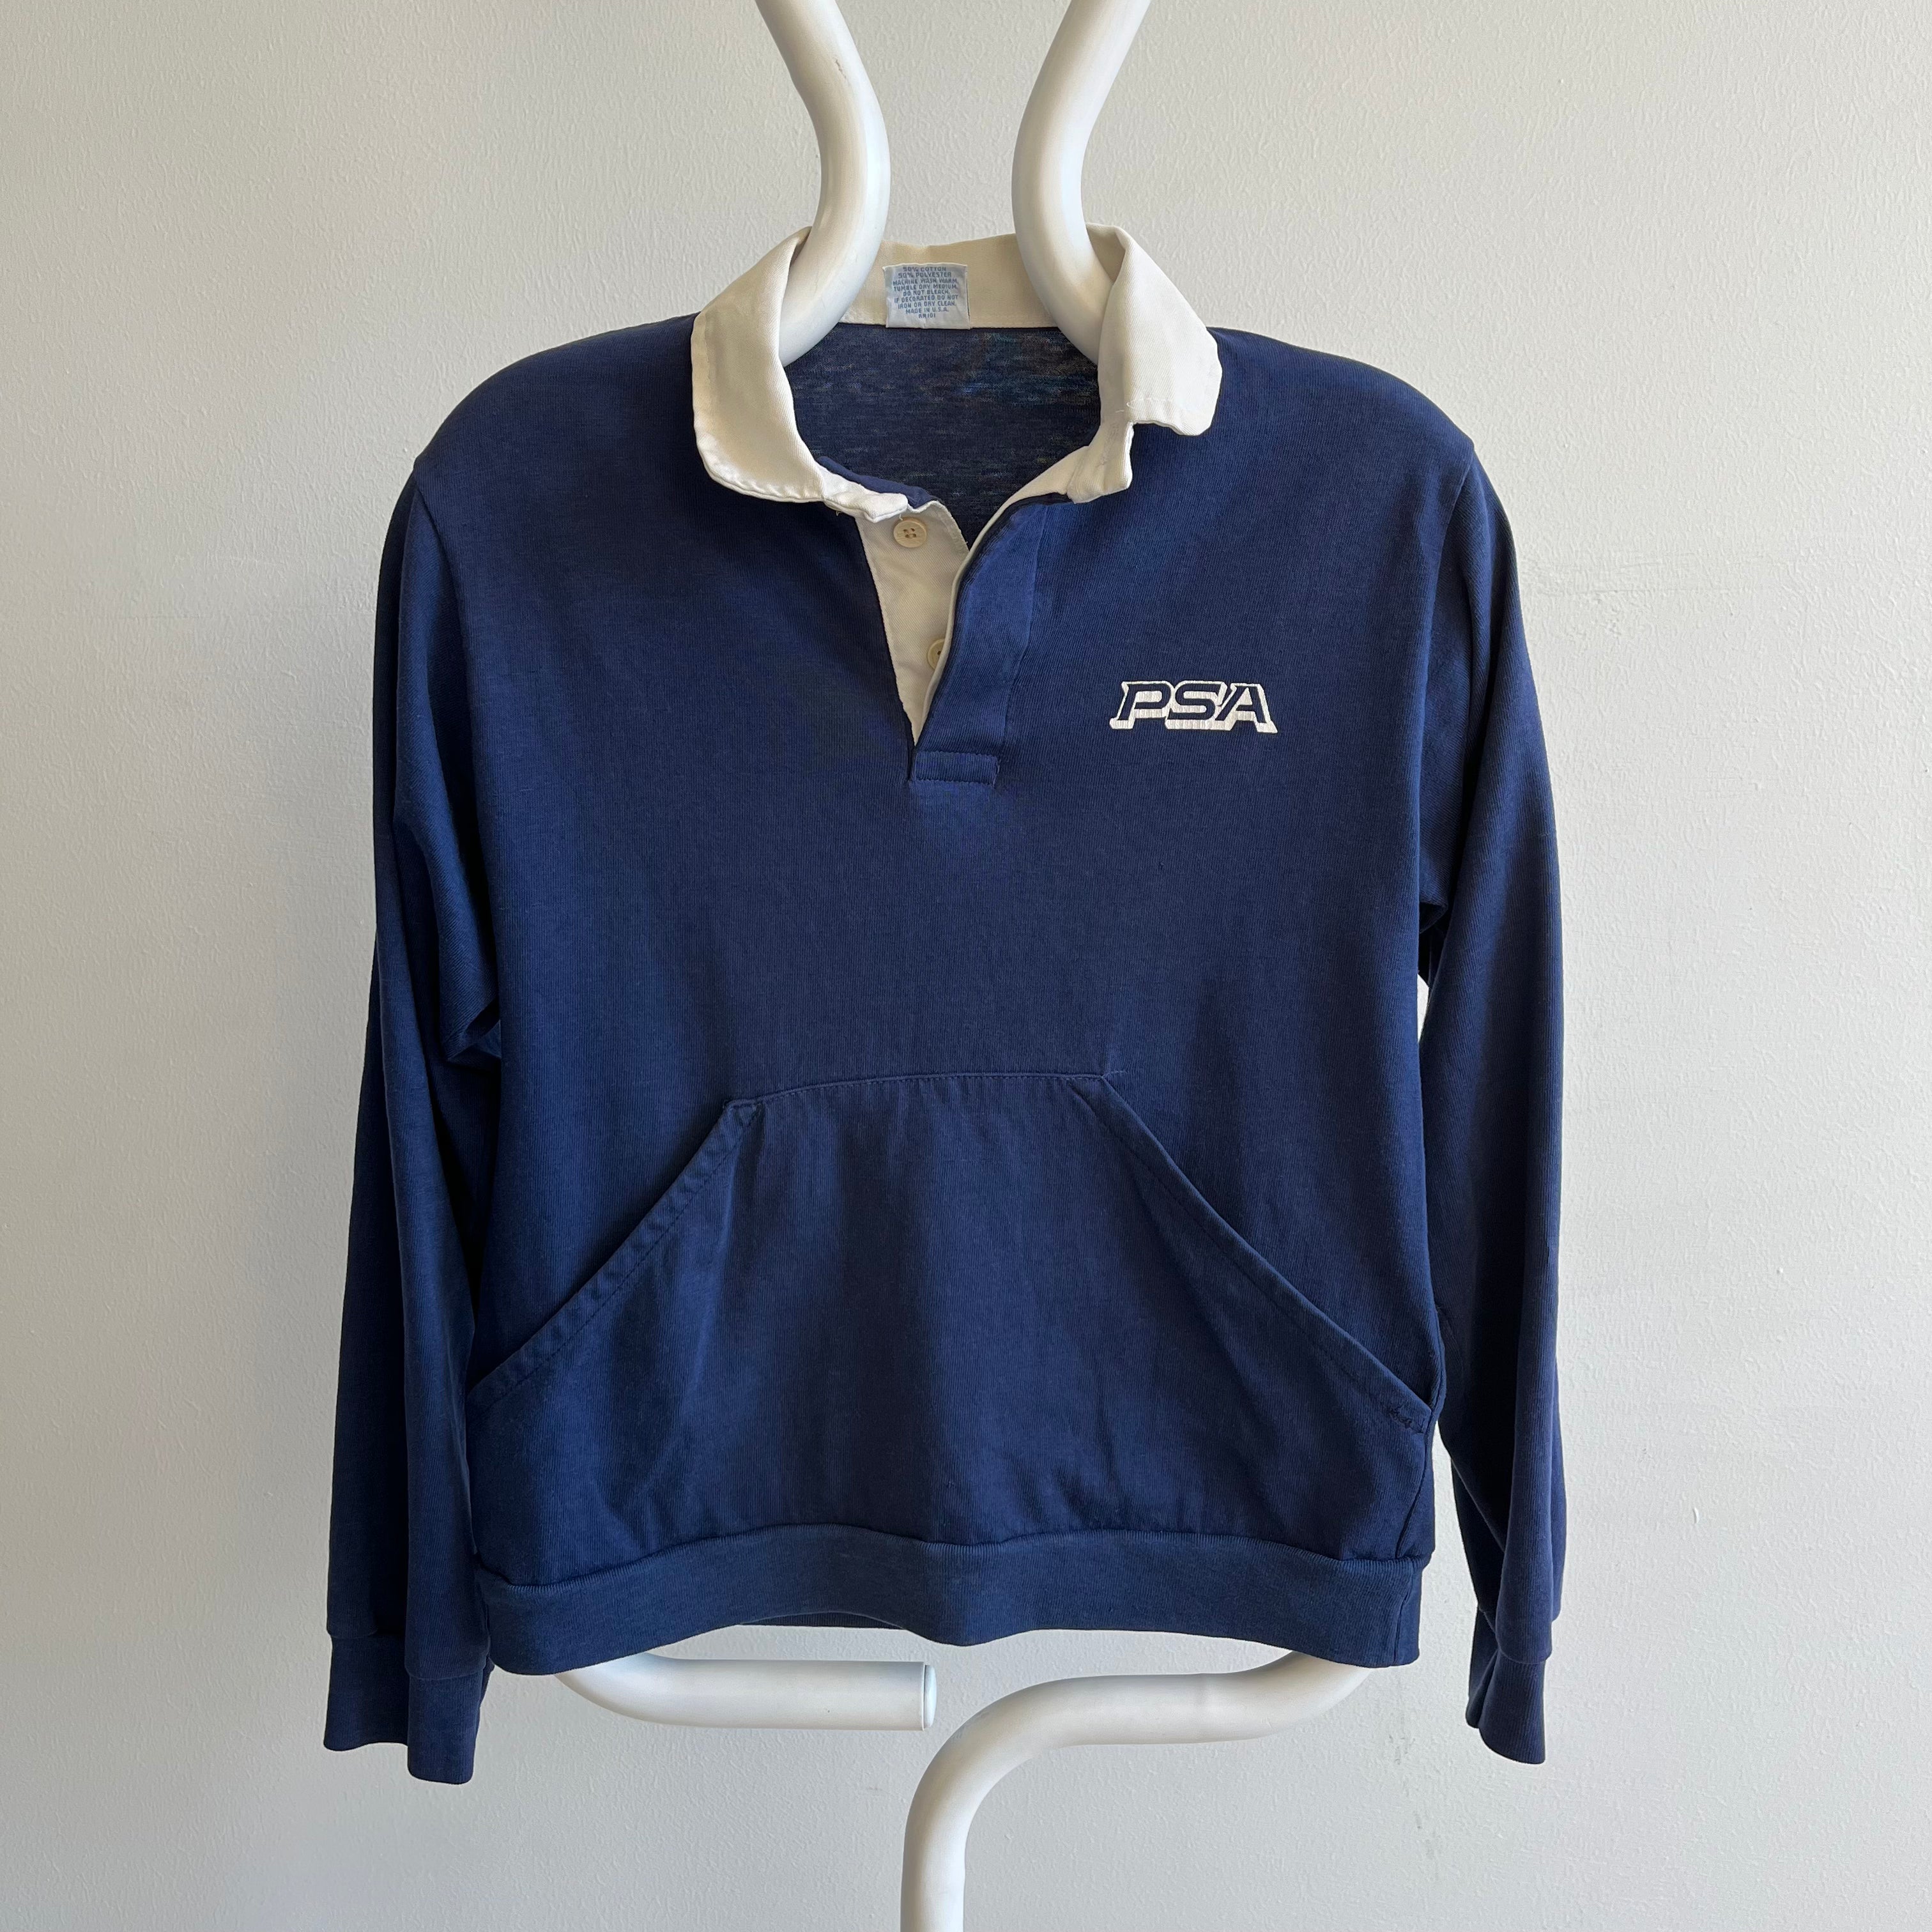 GG 1970s PSA Polo Long Sleeve T-Shirt/Sweatshirt with Pouch !!!